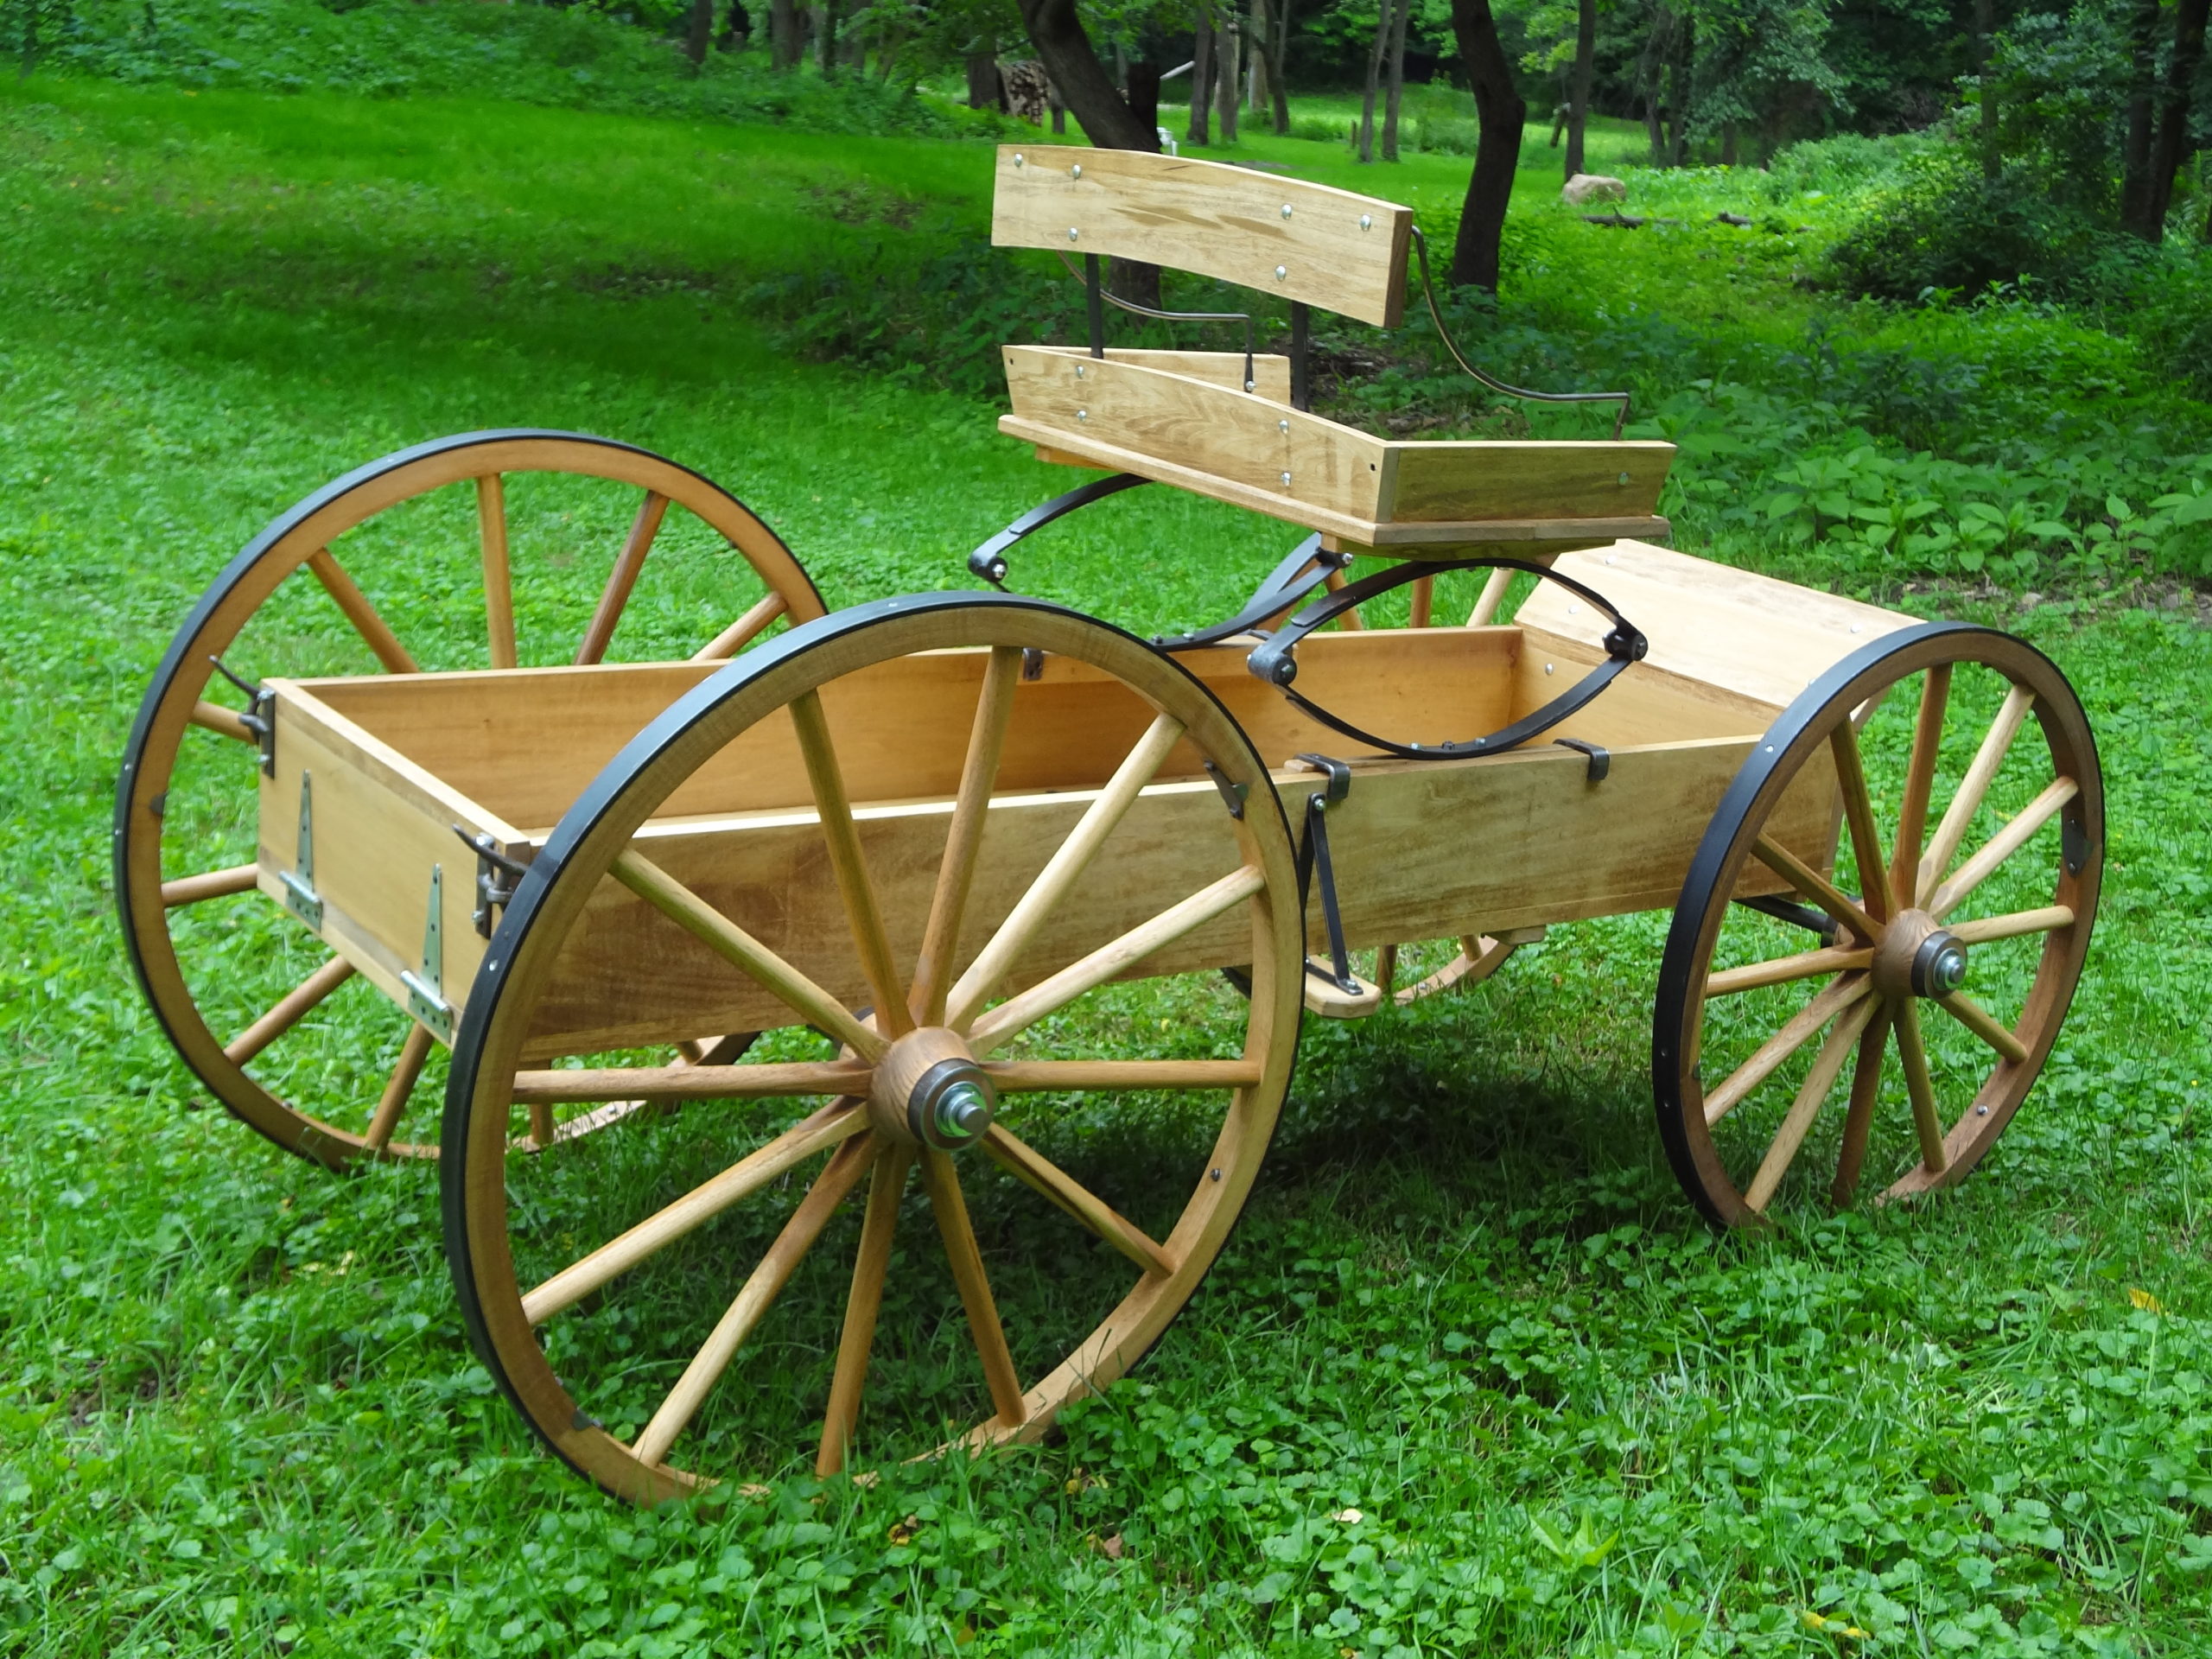 Wooden wagon with large wagon wheels